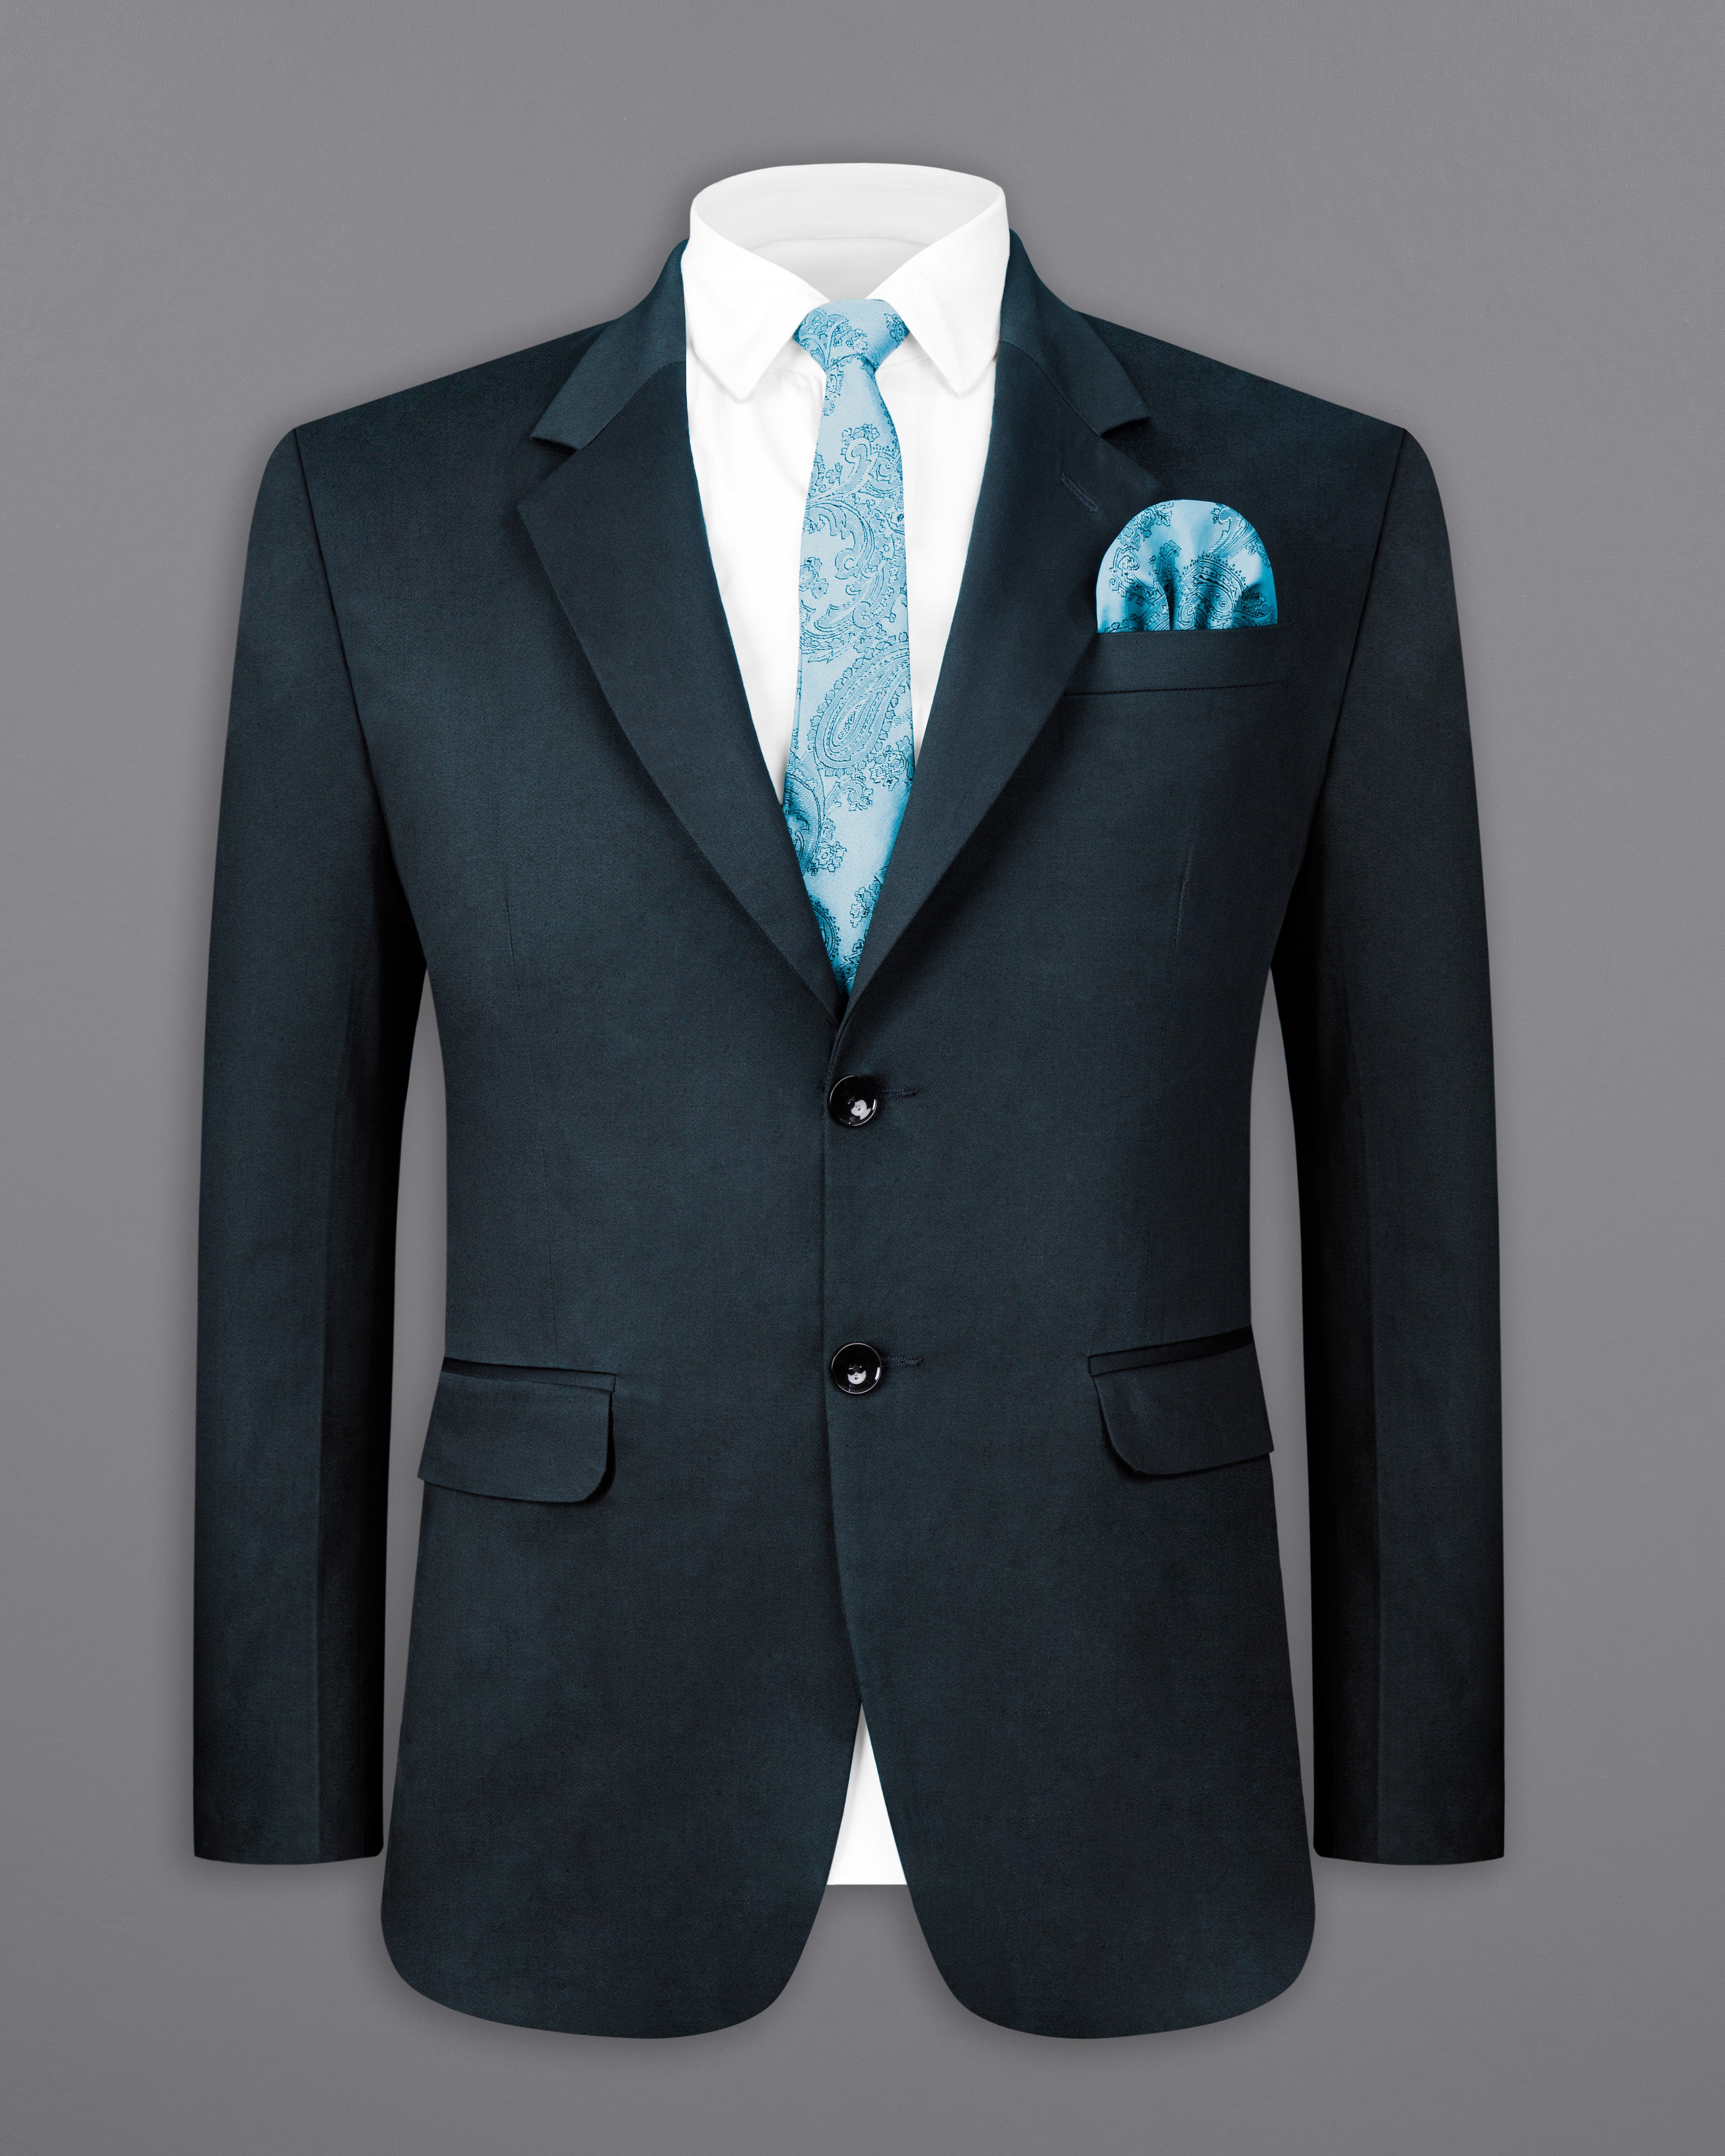 Timber Sea Blue Solid Stretchable Premium Cotton Traveler Suit ST2637-SB-36, ST2637-SB-38, ST2637-SB-40, ST2637-SB-42, ST2637-SB-44, ST2637-SB-46, ST2637-SB-48, ST2637-SB-50, ST2637-SB-52, ST2637-SB-54, ST2637-SB-56, ST2637-SB-58, ST2637-SB-60